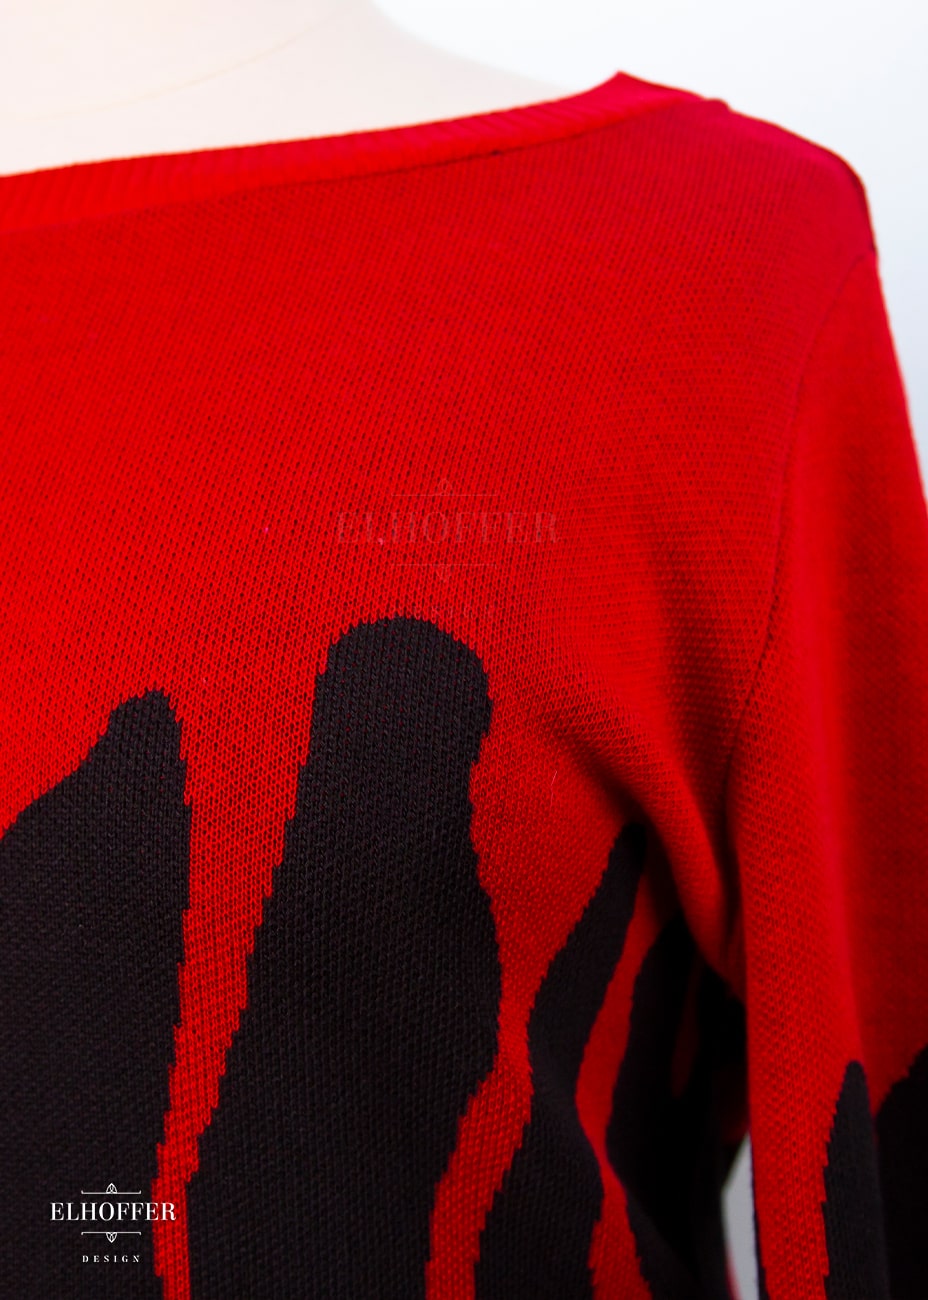 A close up of the blood drip design on the knit sweater